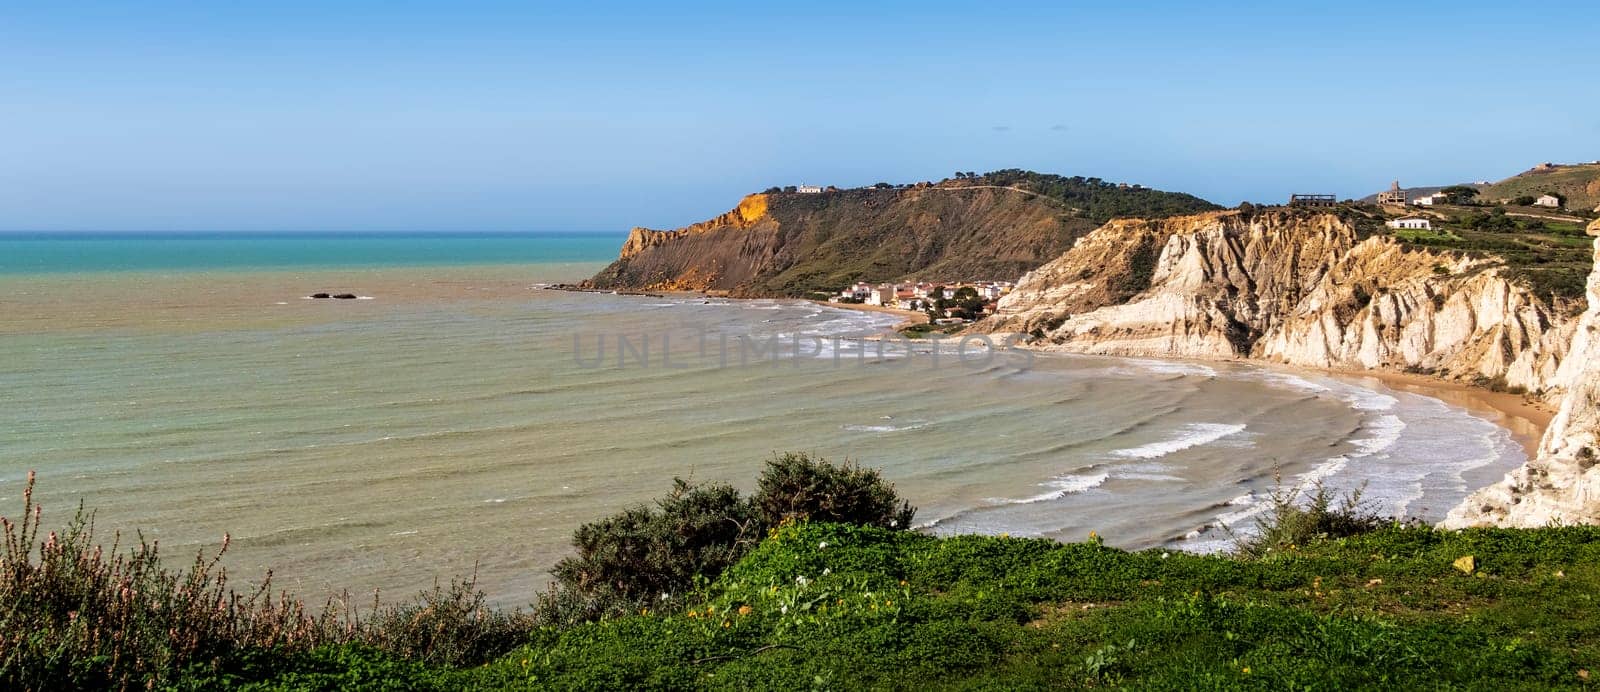 Panoramic view of the coastline near Lido Rossello Agrigento, Italy.  by EdVal